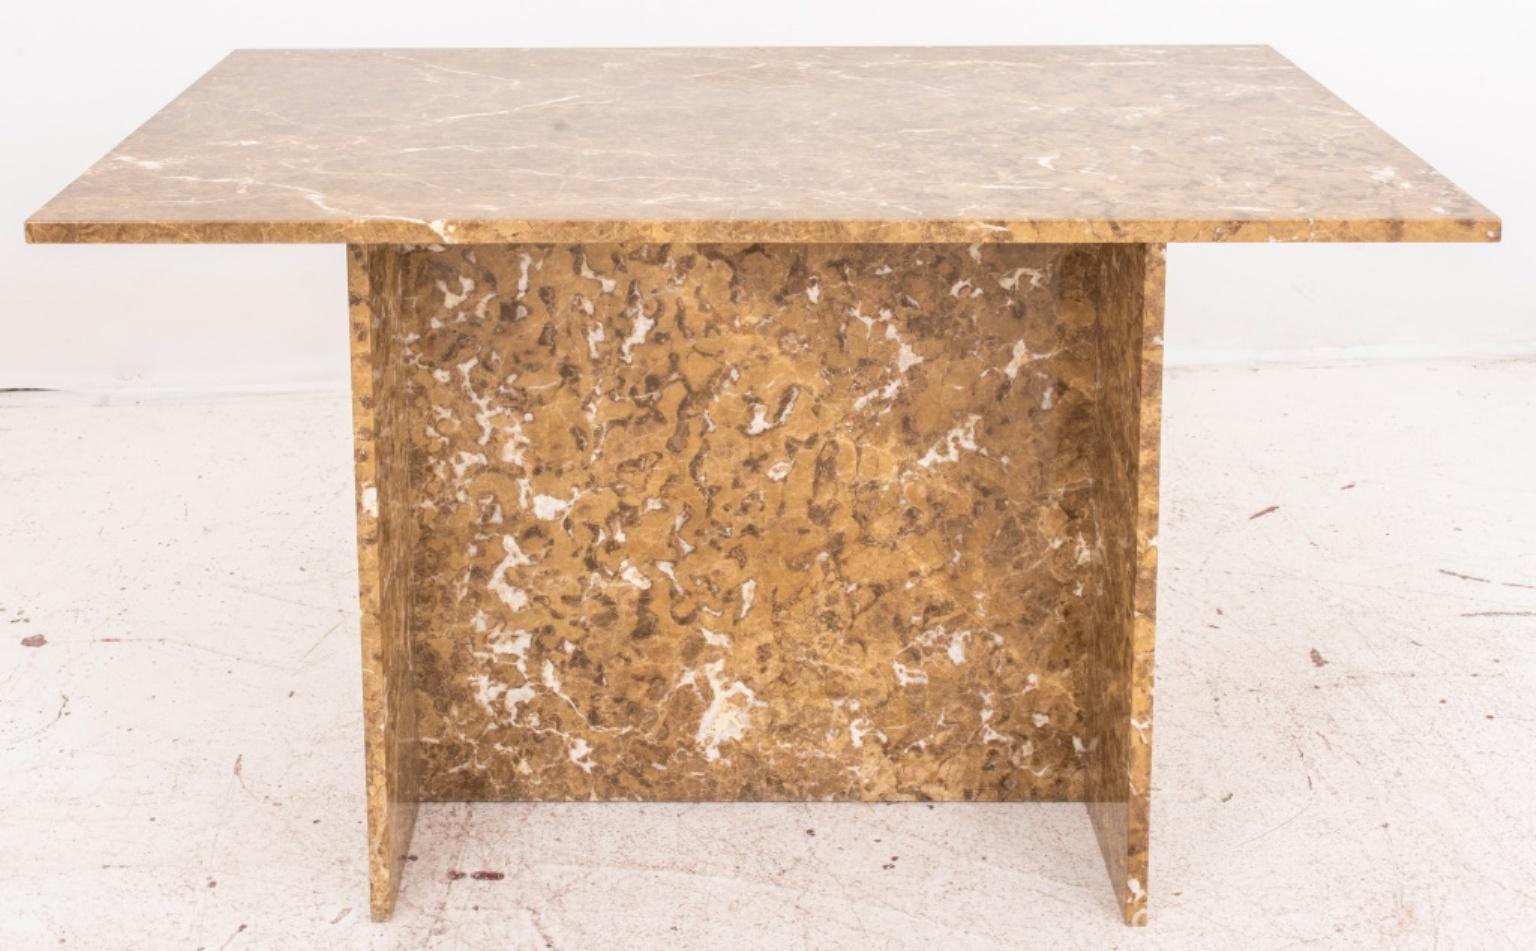 Vintage light emperador marble dining table raised on pedestal base. In good vintage condition. Wear consistent with age and use.

Dealer: S138XX